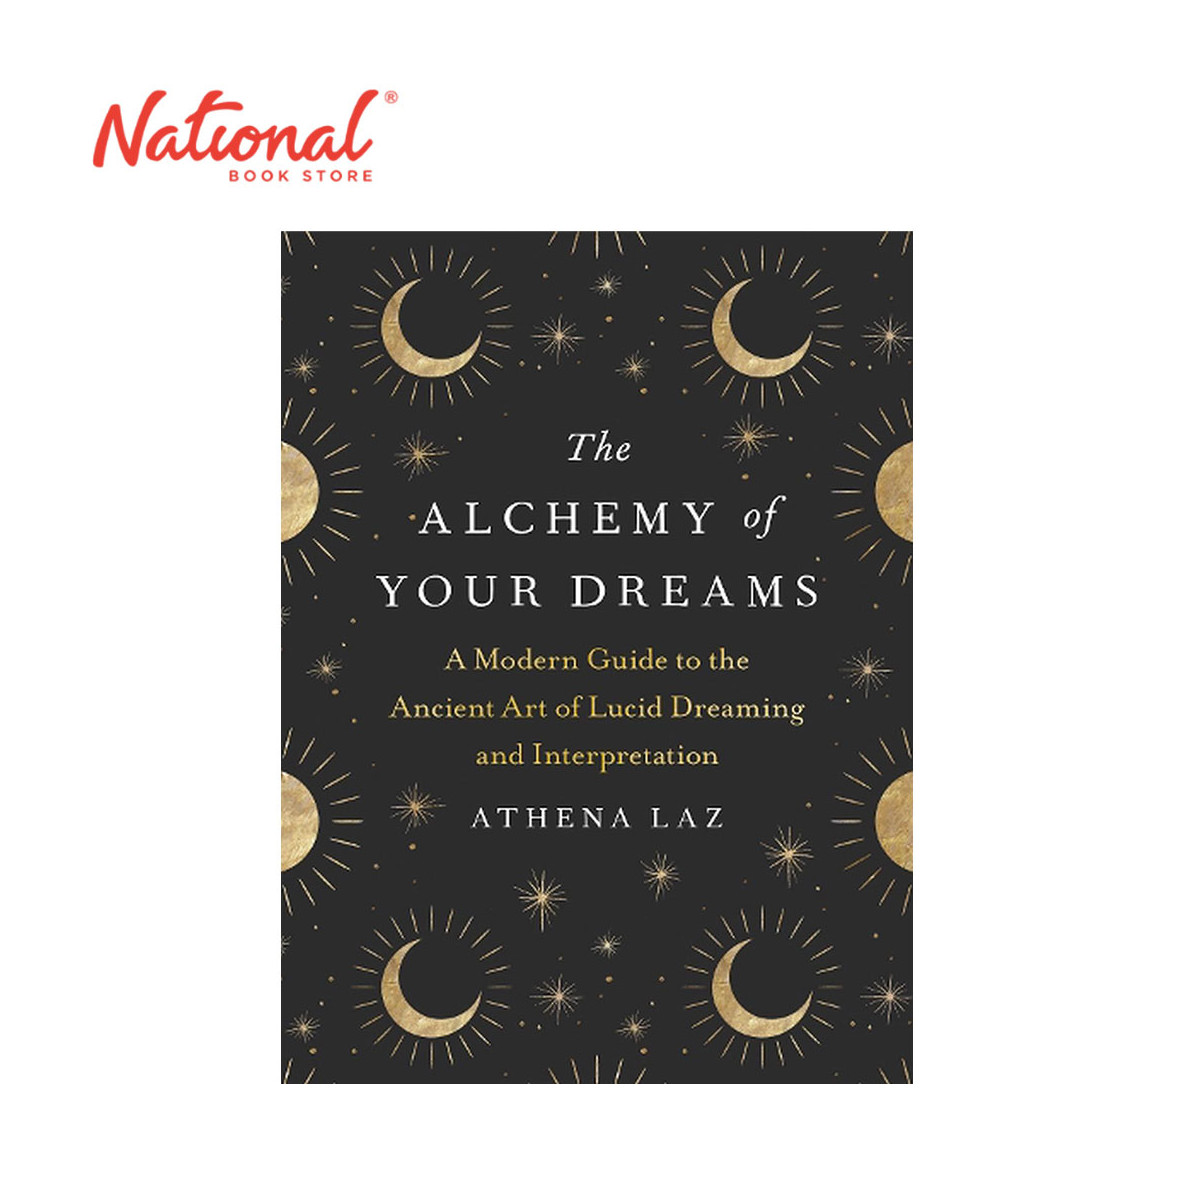 The Alchemy of Your Dreams : A Modern Guide to the Ancient Art of Lucid Dreaming by Athena Laz